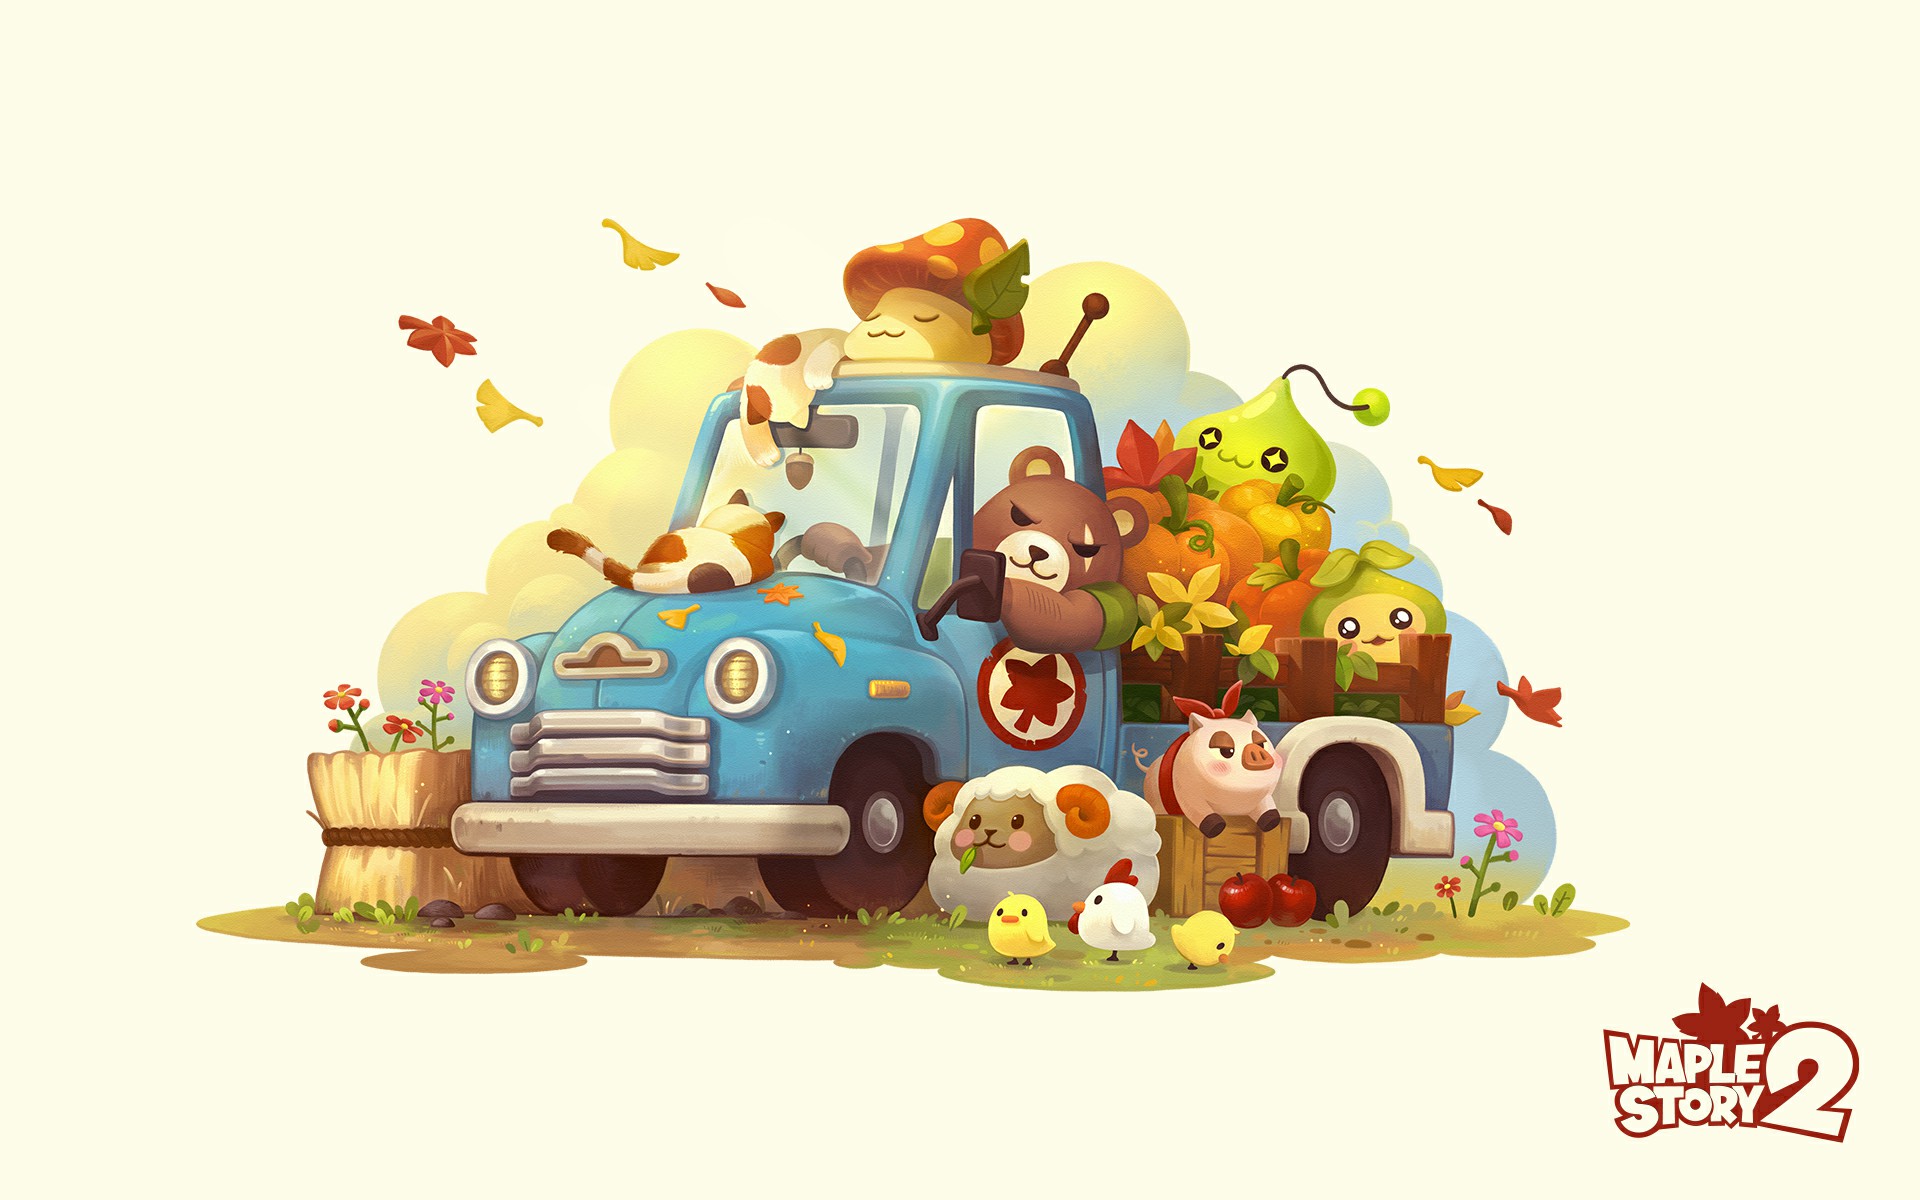 Autumn-themed MapleStory 2 wallpapers